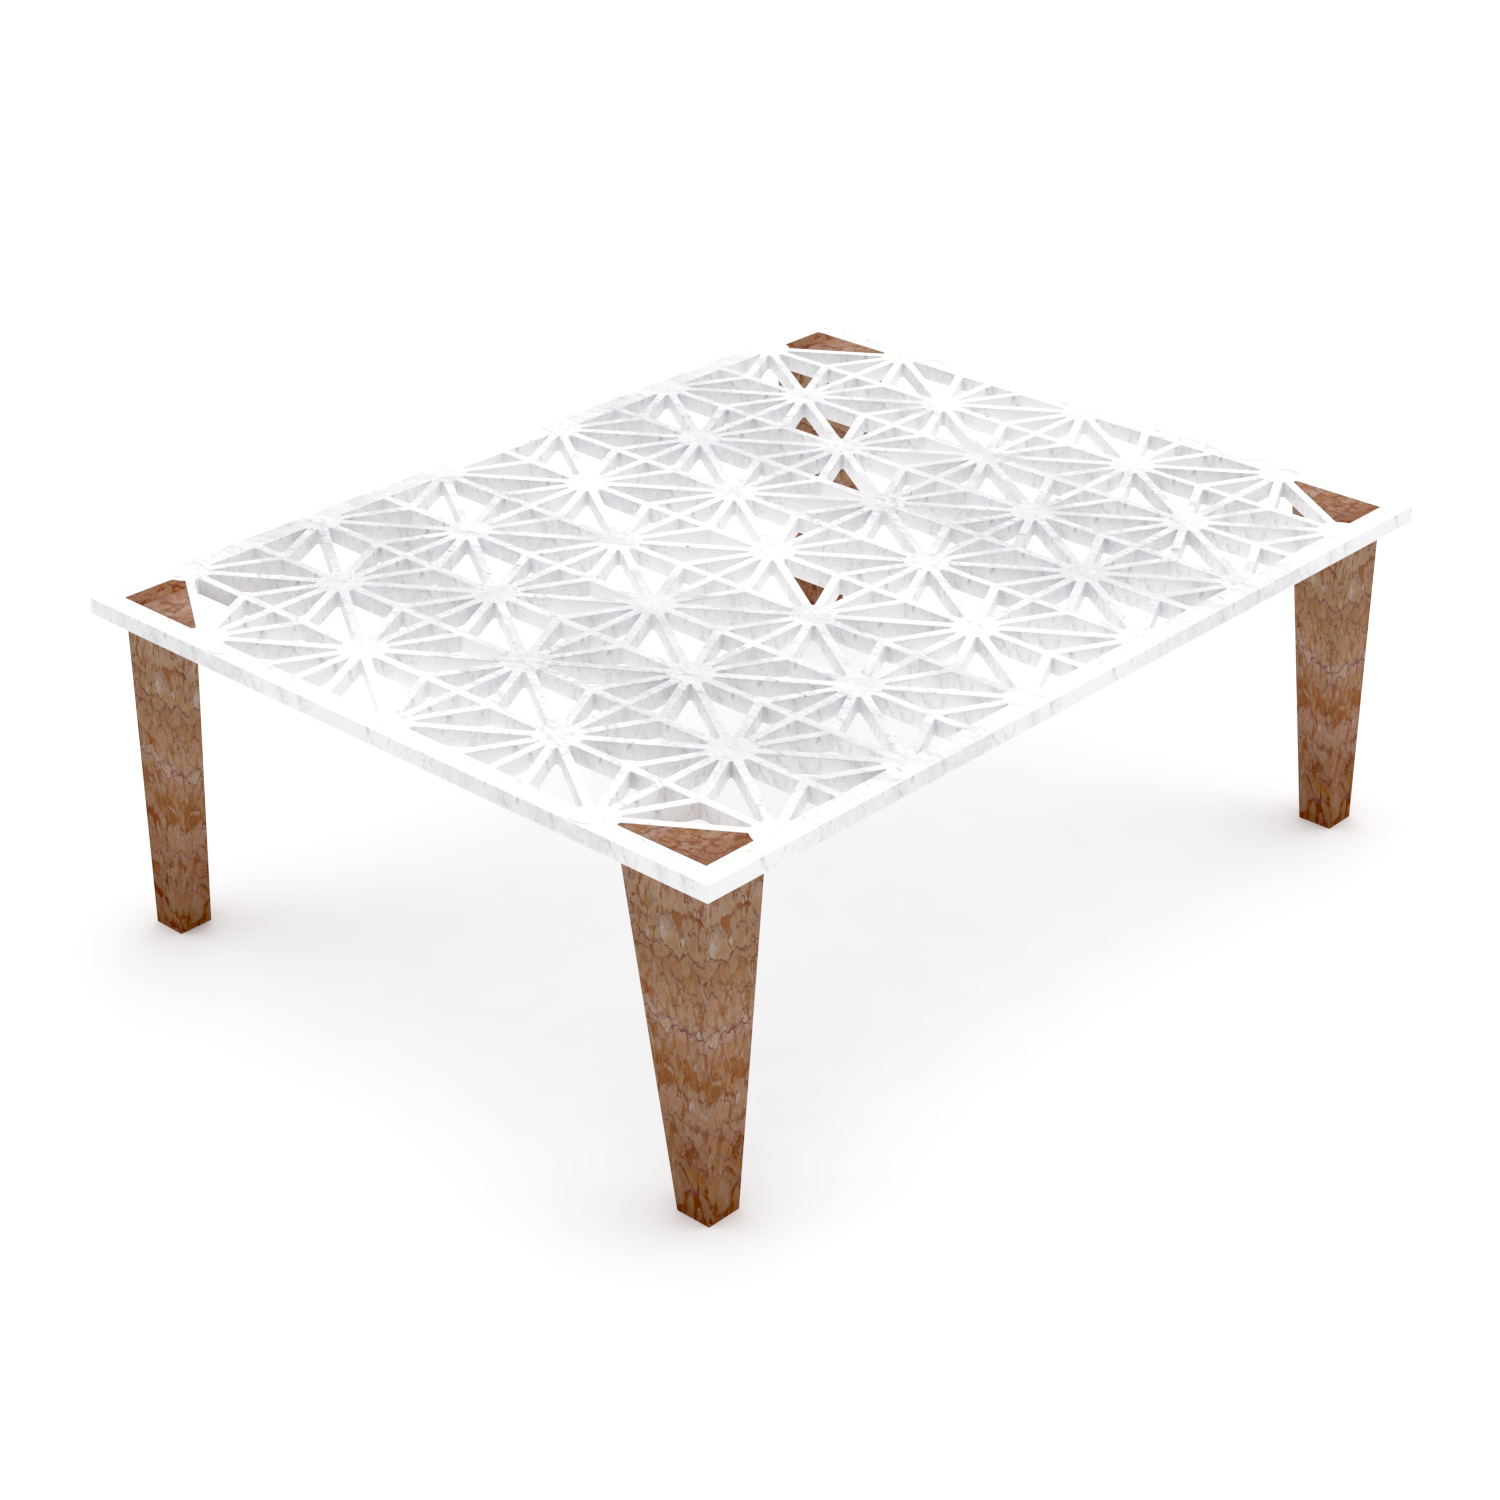 Lace Bianco Carrara and Rosso Verona marble table